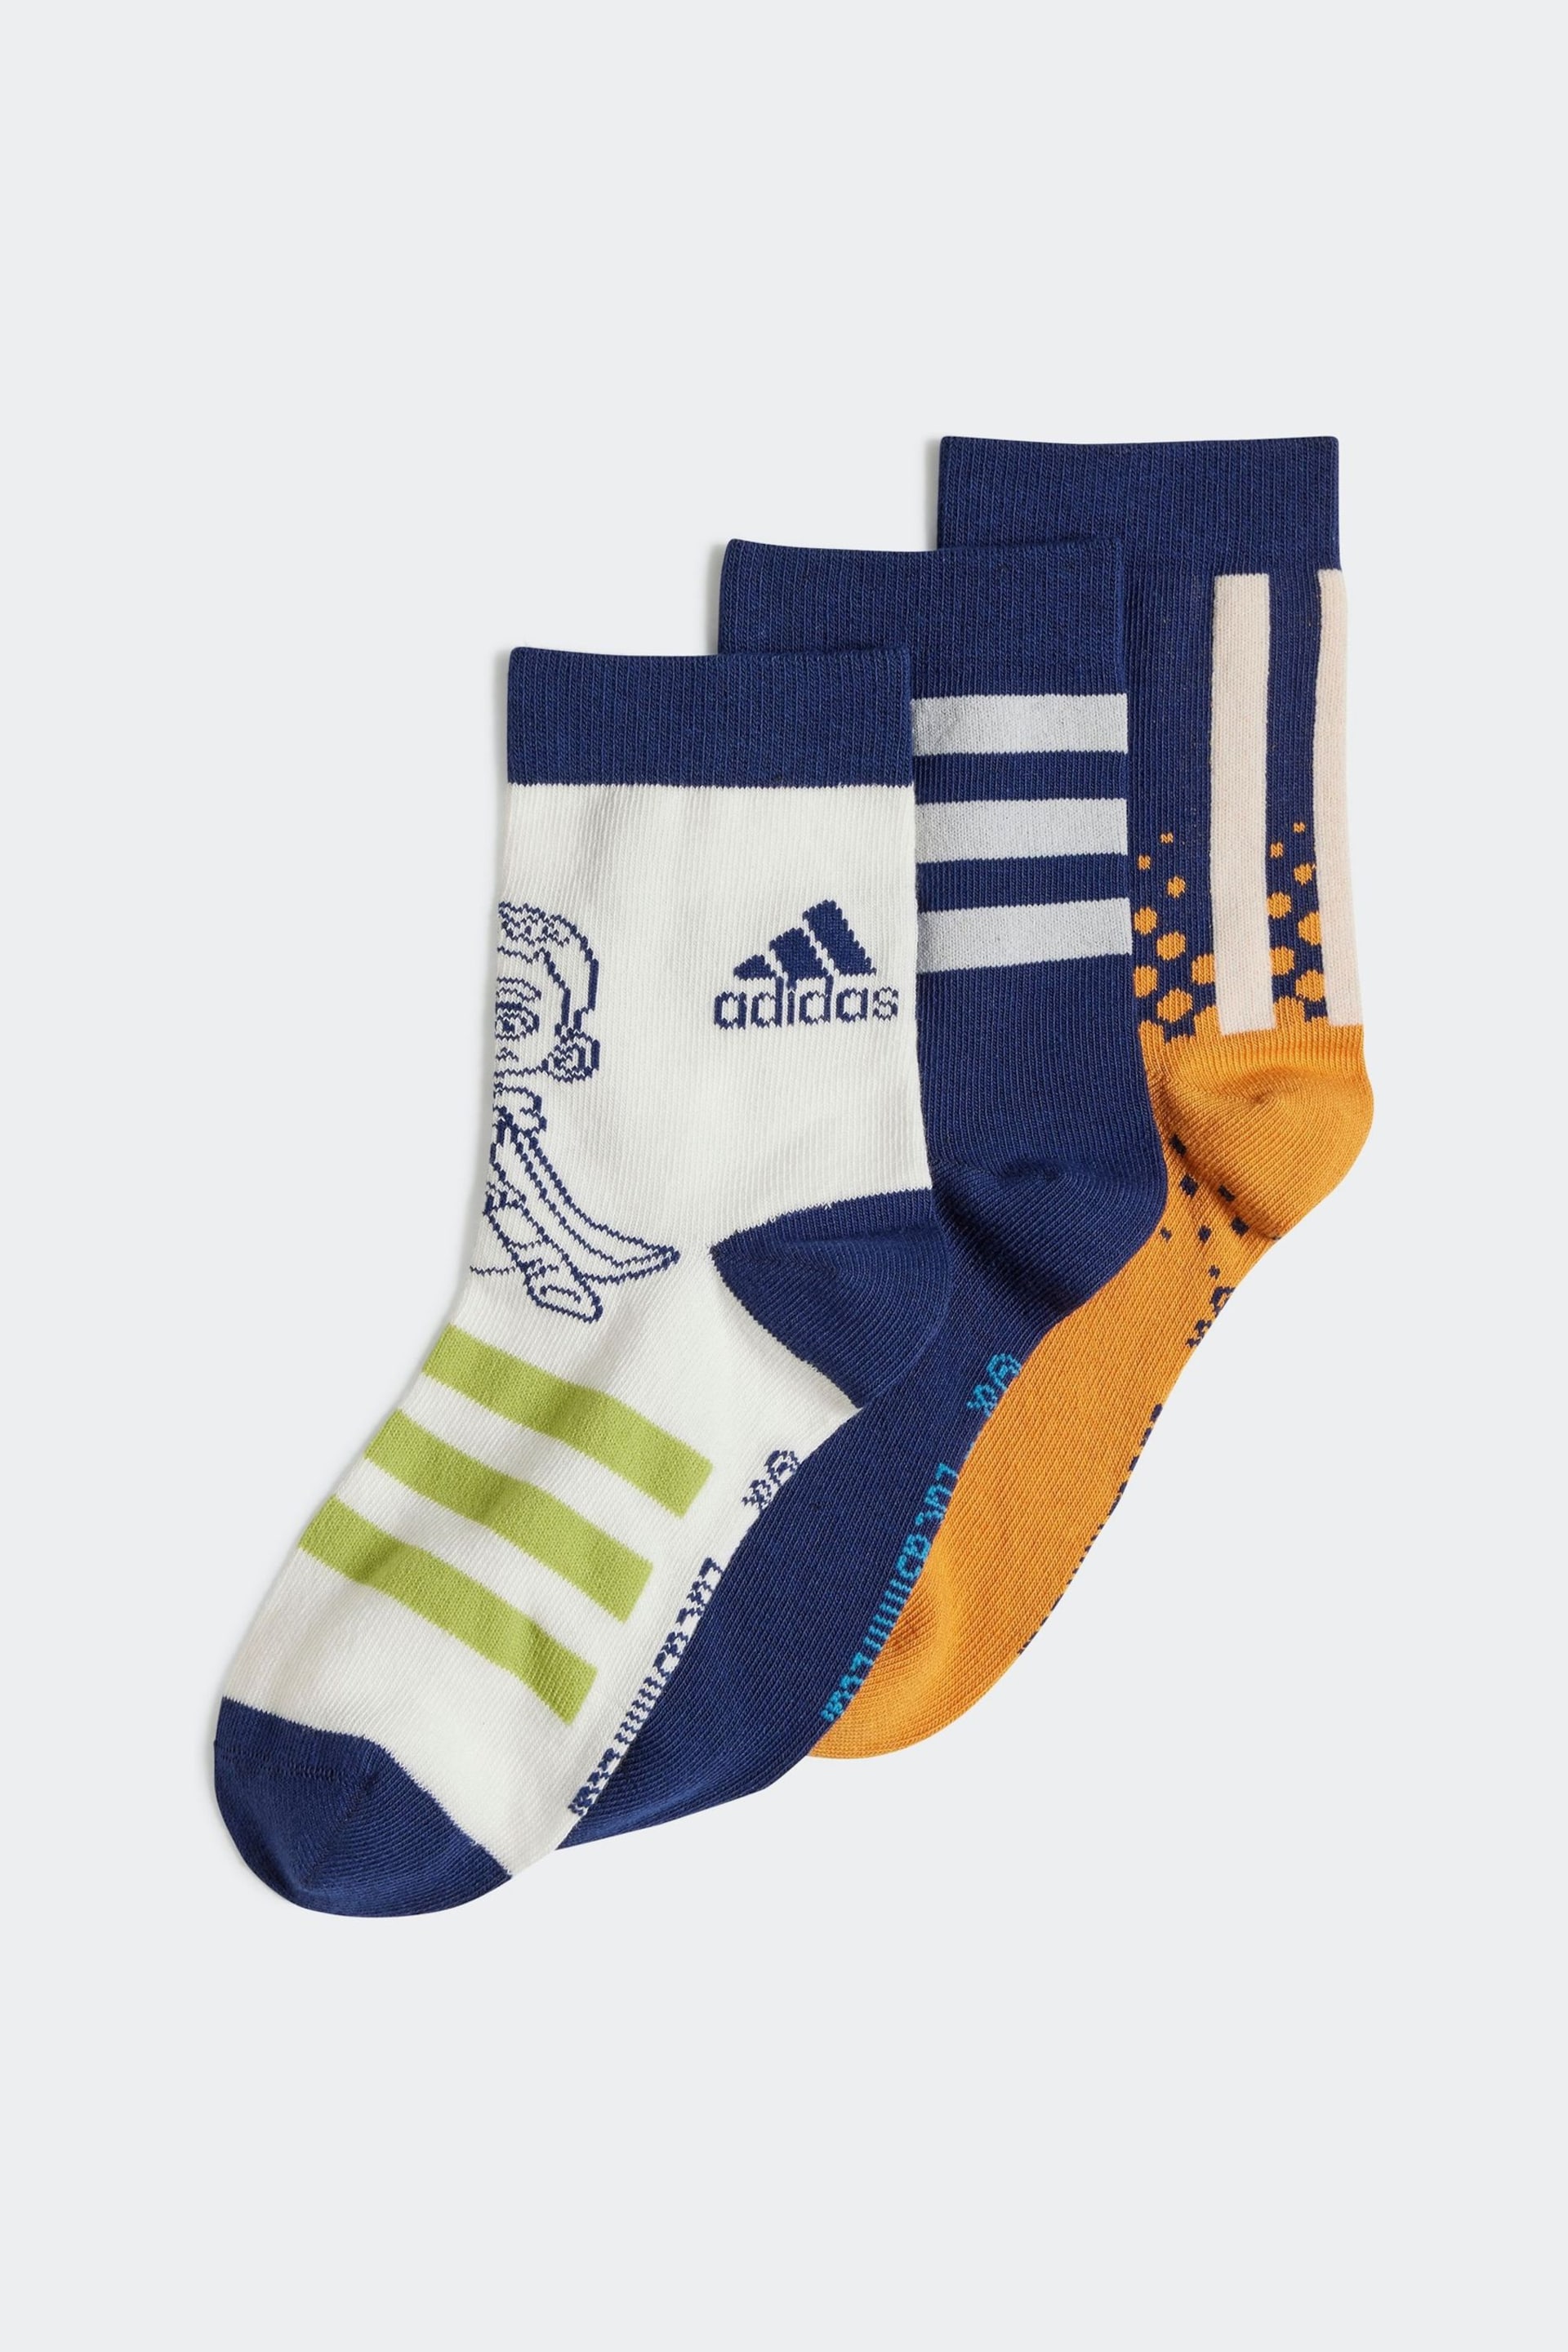 adidas Blue Star Wars Young Jedi Socks 3 Pack - Image 1 of 7